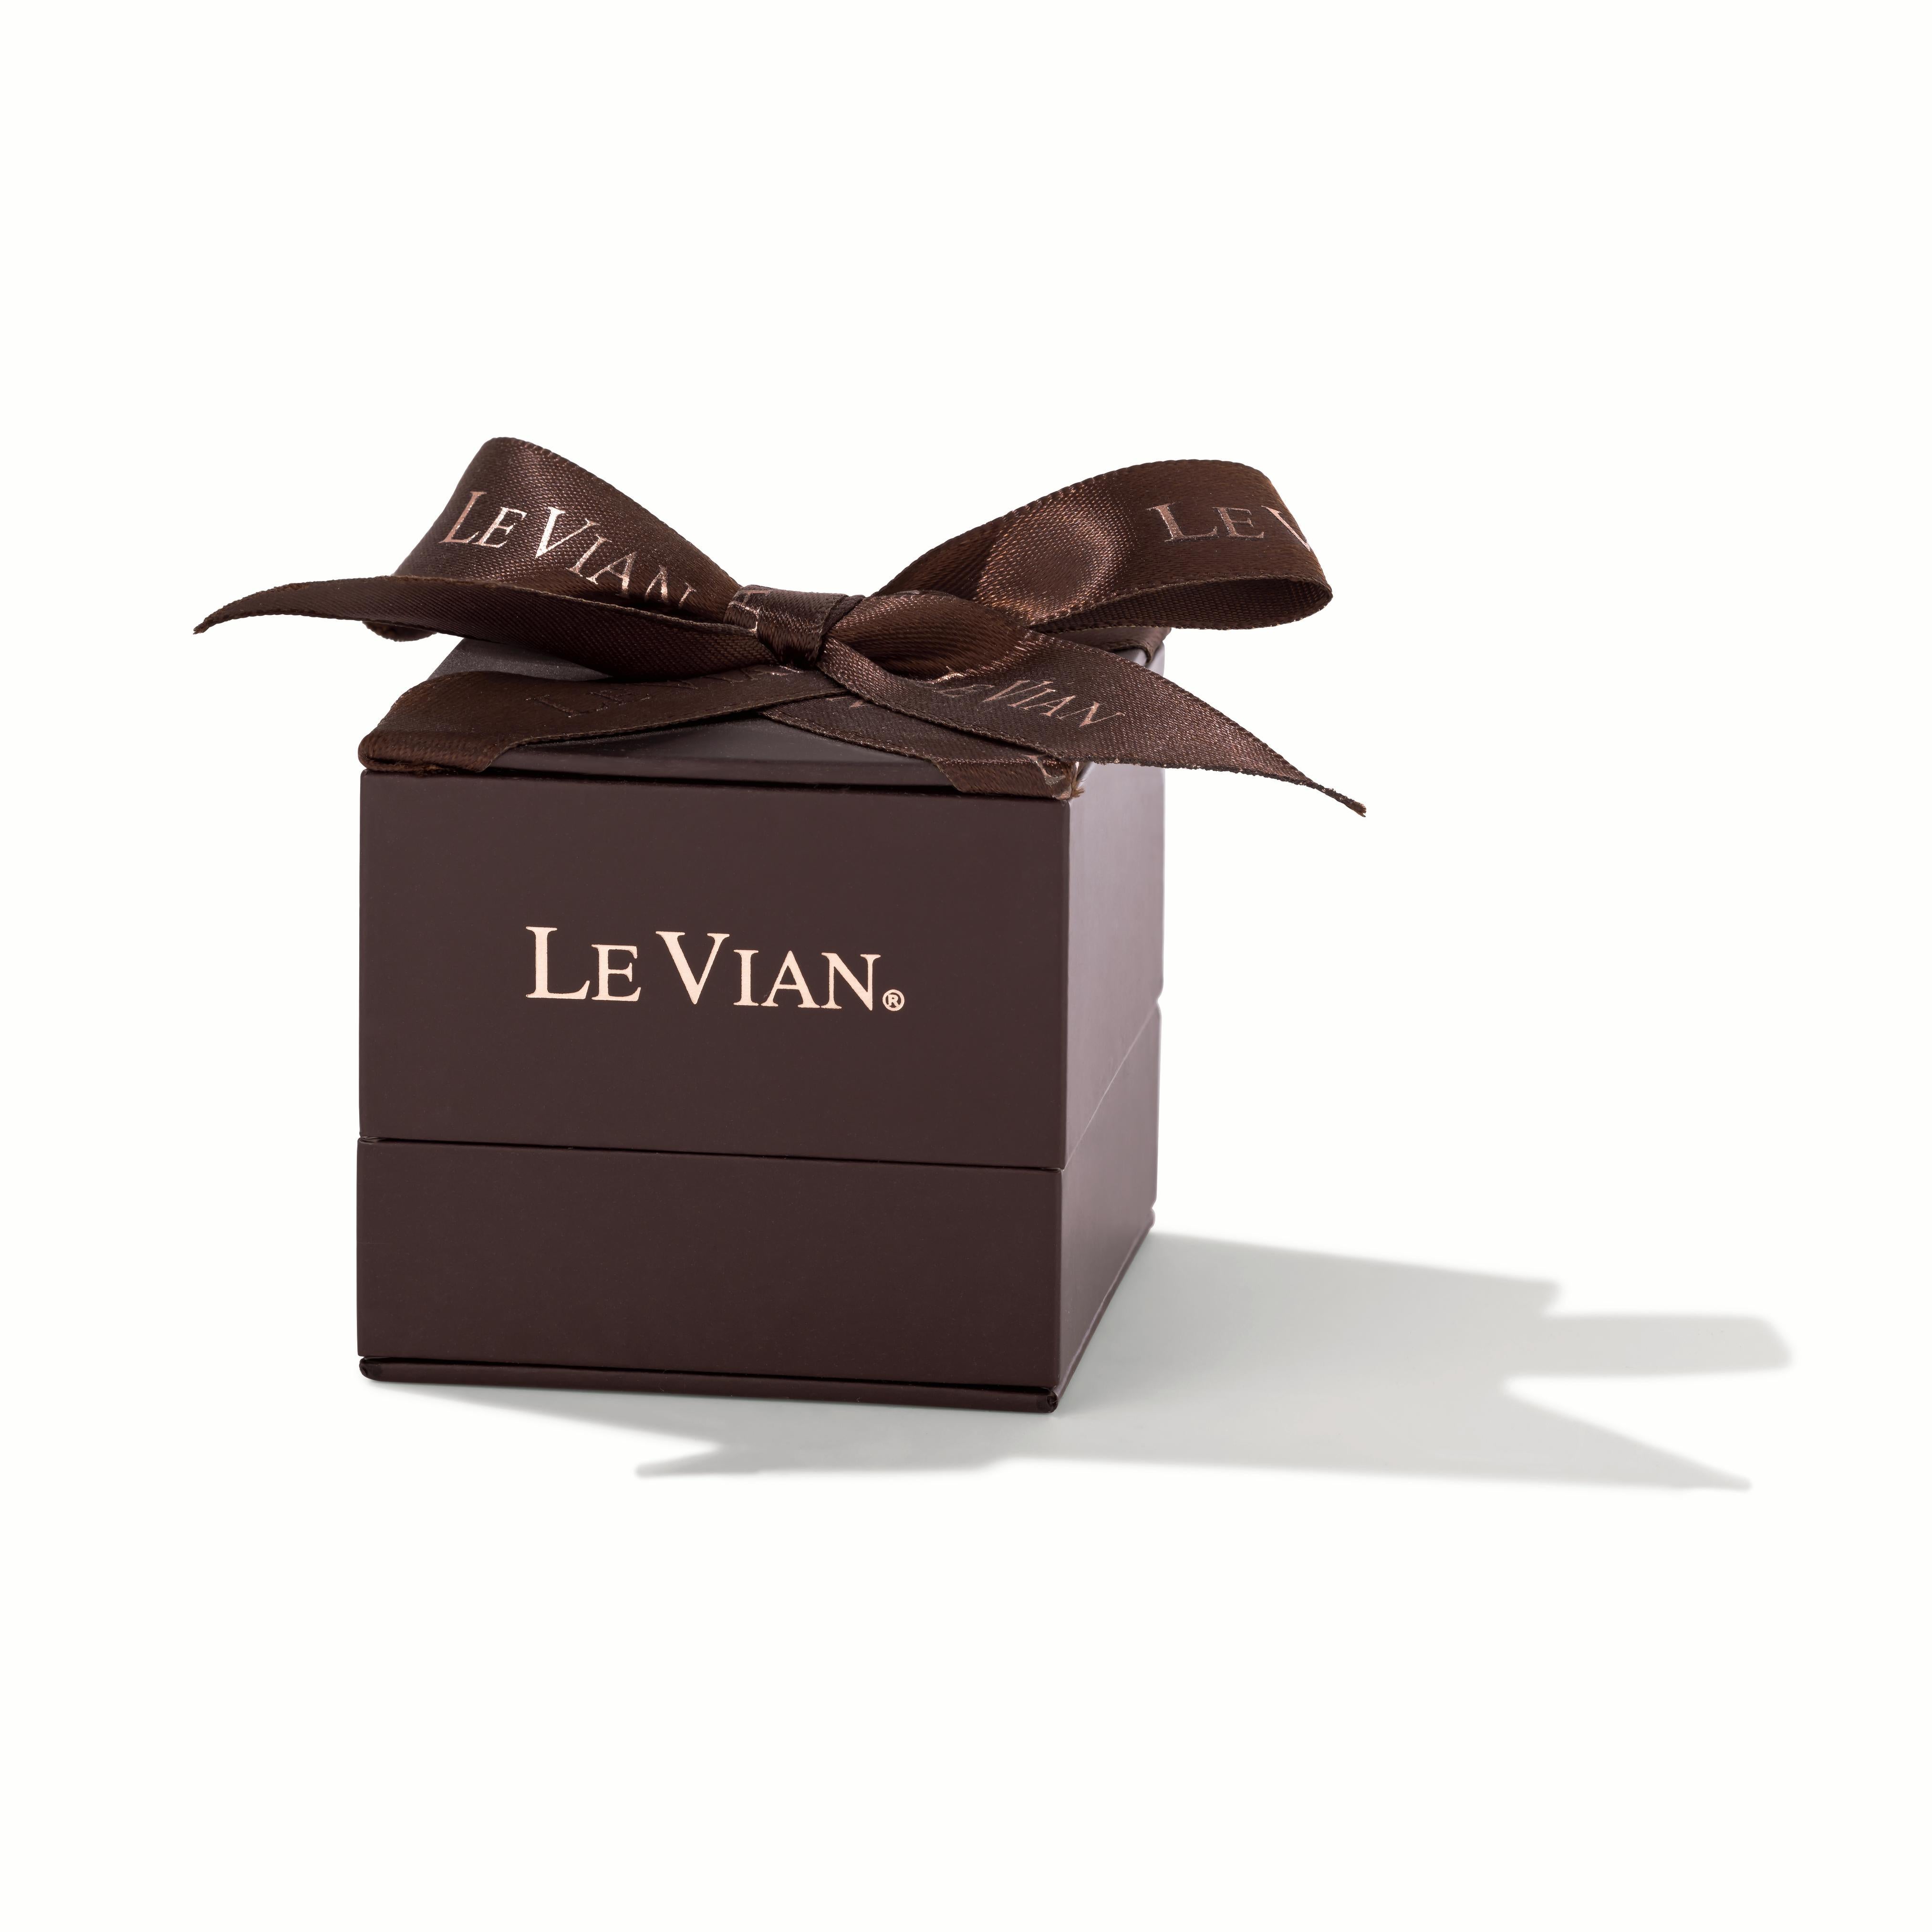 Le Vian® Pendant featuring 2.00 cts Vanilla Diamonds® set in 18K Honey Gold™

Diamonds Breakdown:
2.00 cts White Diamonds

Gems Breakdown:
None

Item comes with a Le Vian® jewelry box as well as a Le Vian® suede pouch

FREE SHIPPING & FREE 30 DAY